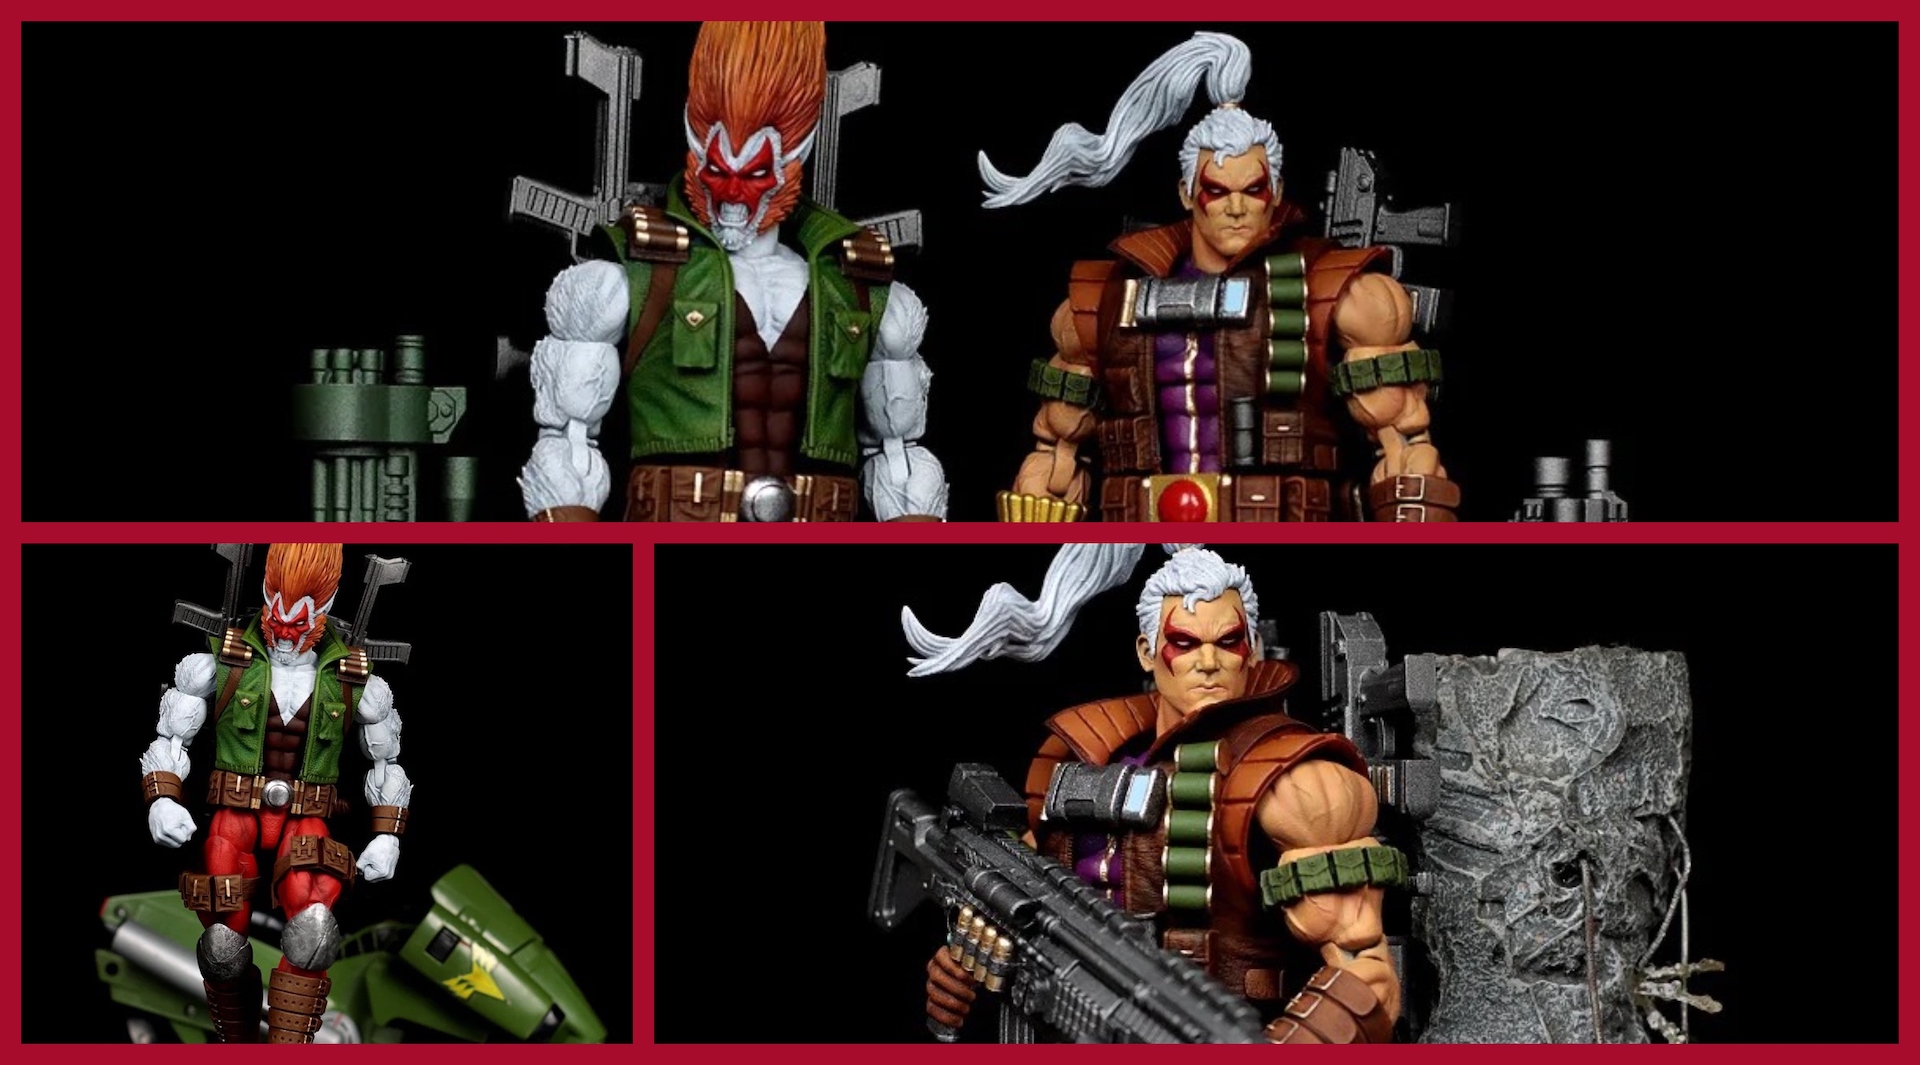 Rob Liefeld teams up with LooseCollector for EXTREME Bloodstrike action figures